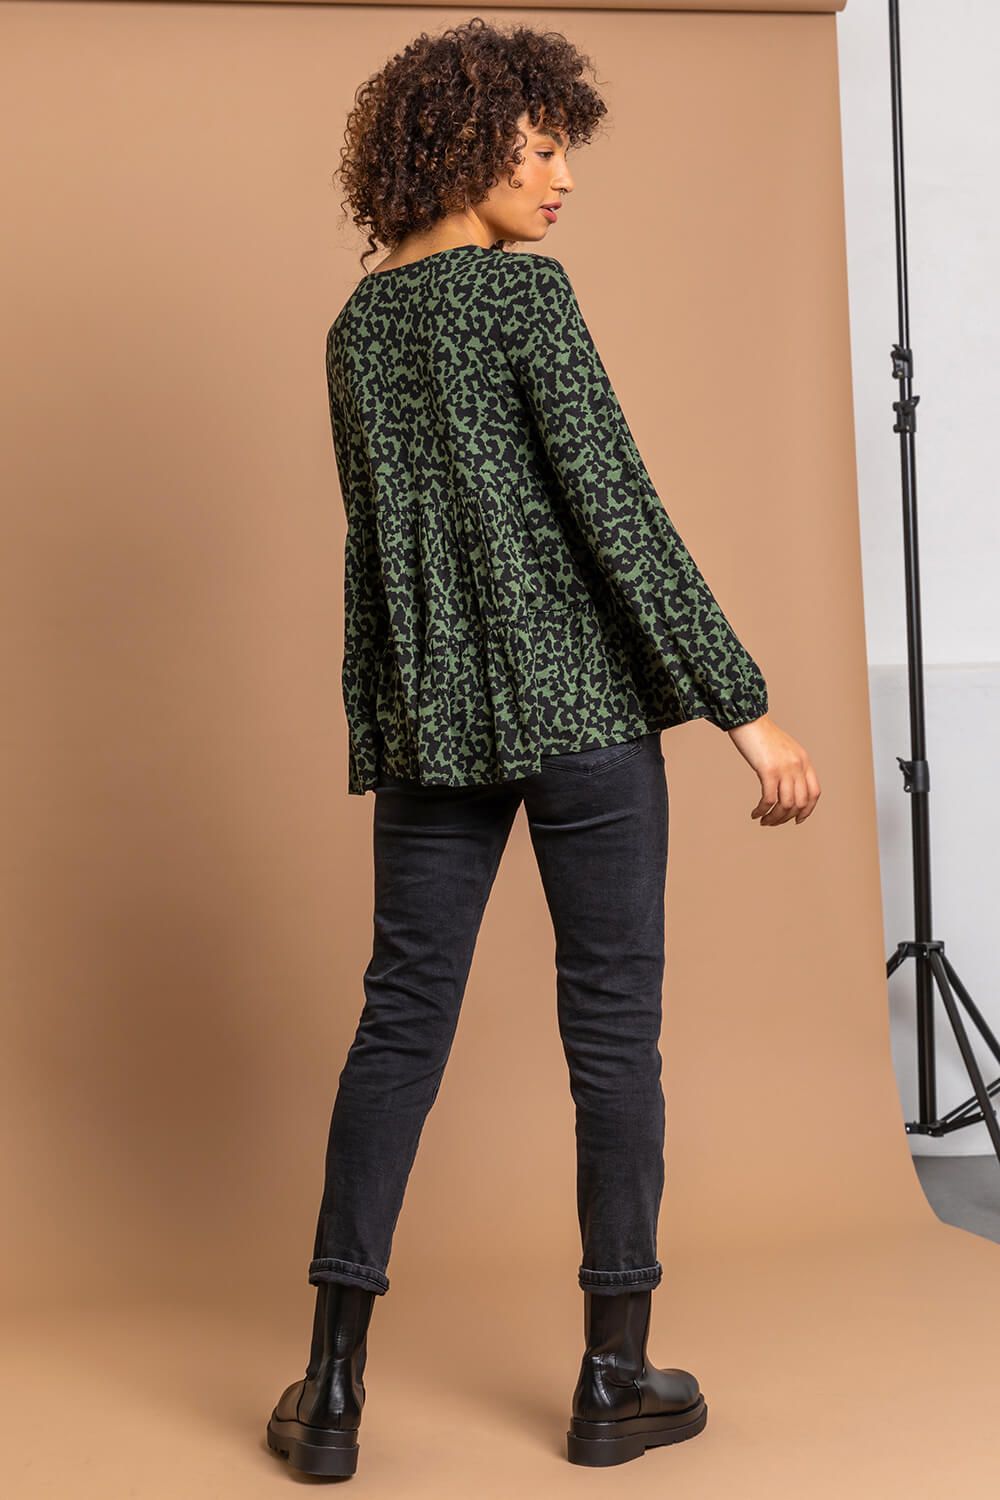 Green Animal Print V Neck Tiered Top, Image 2 of 5